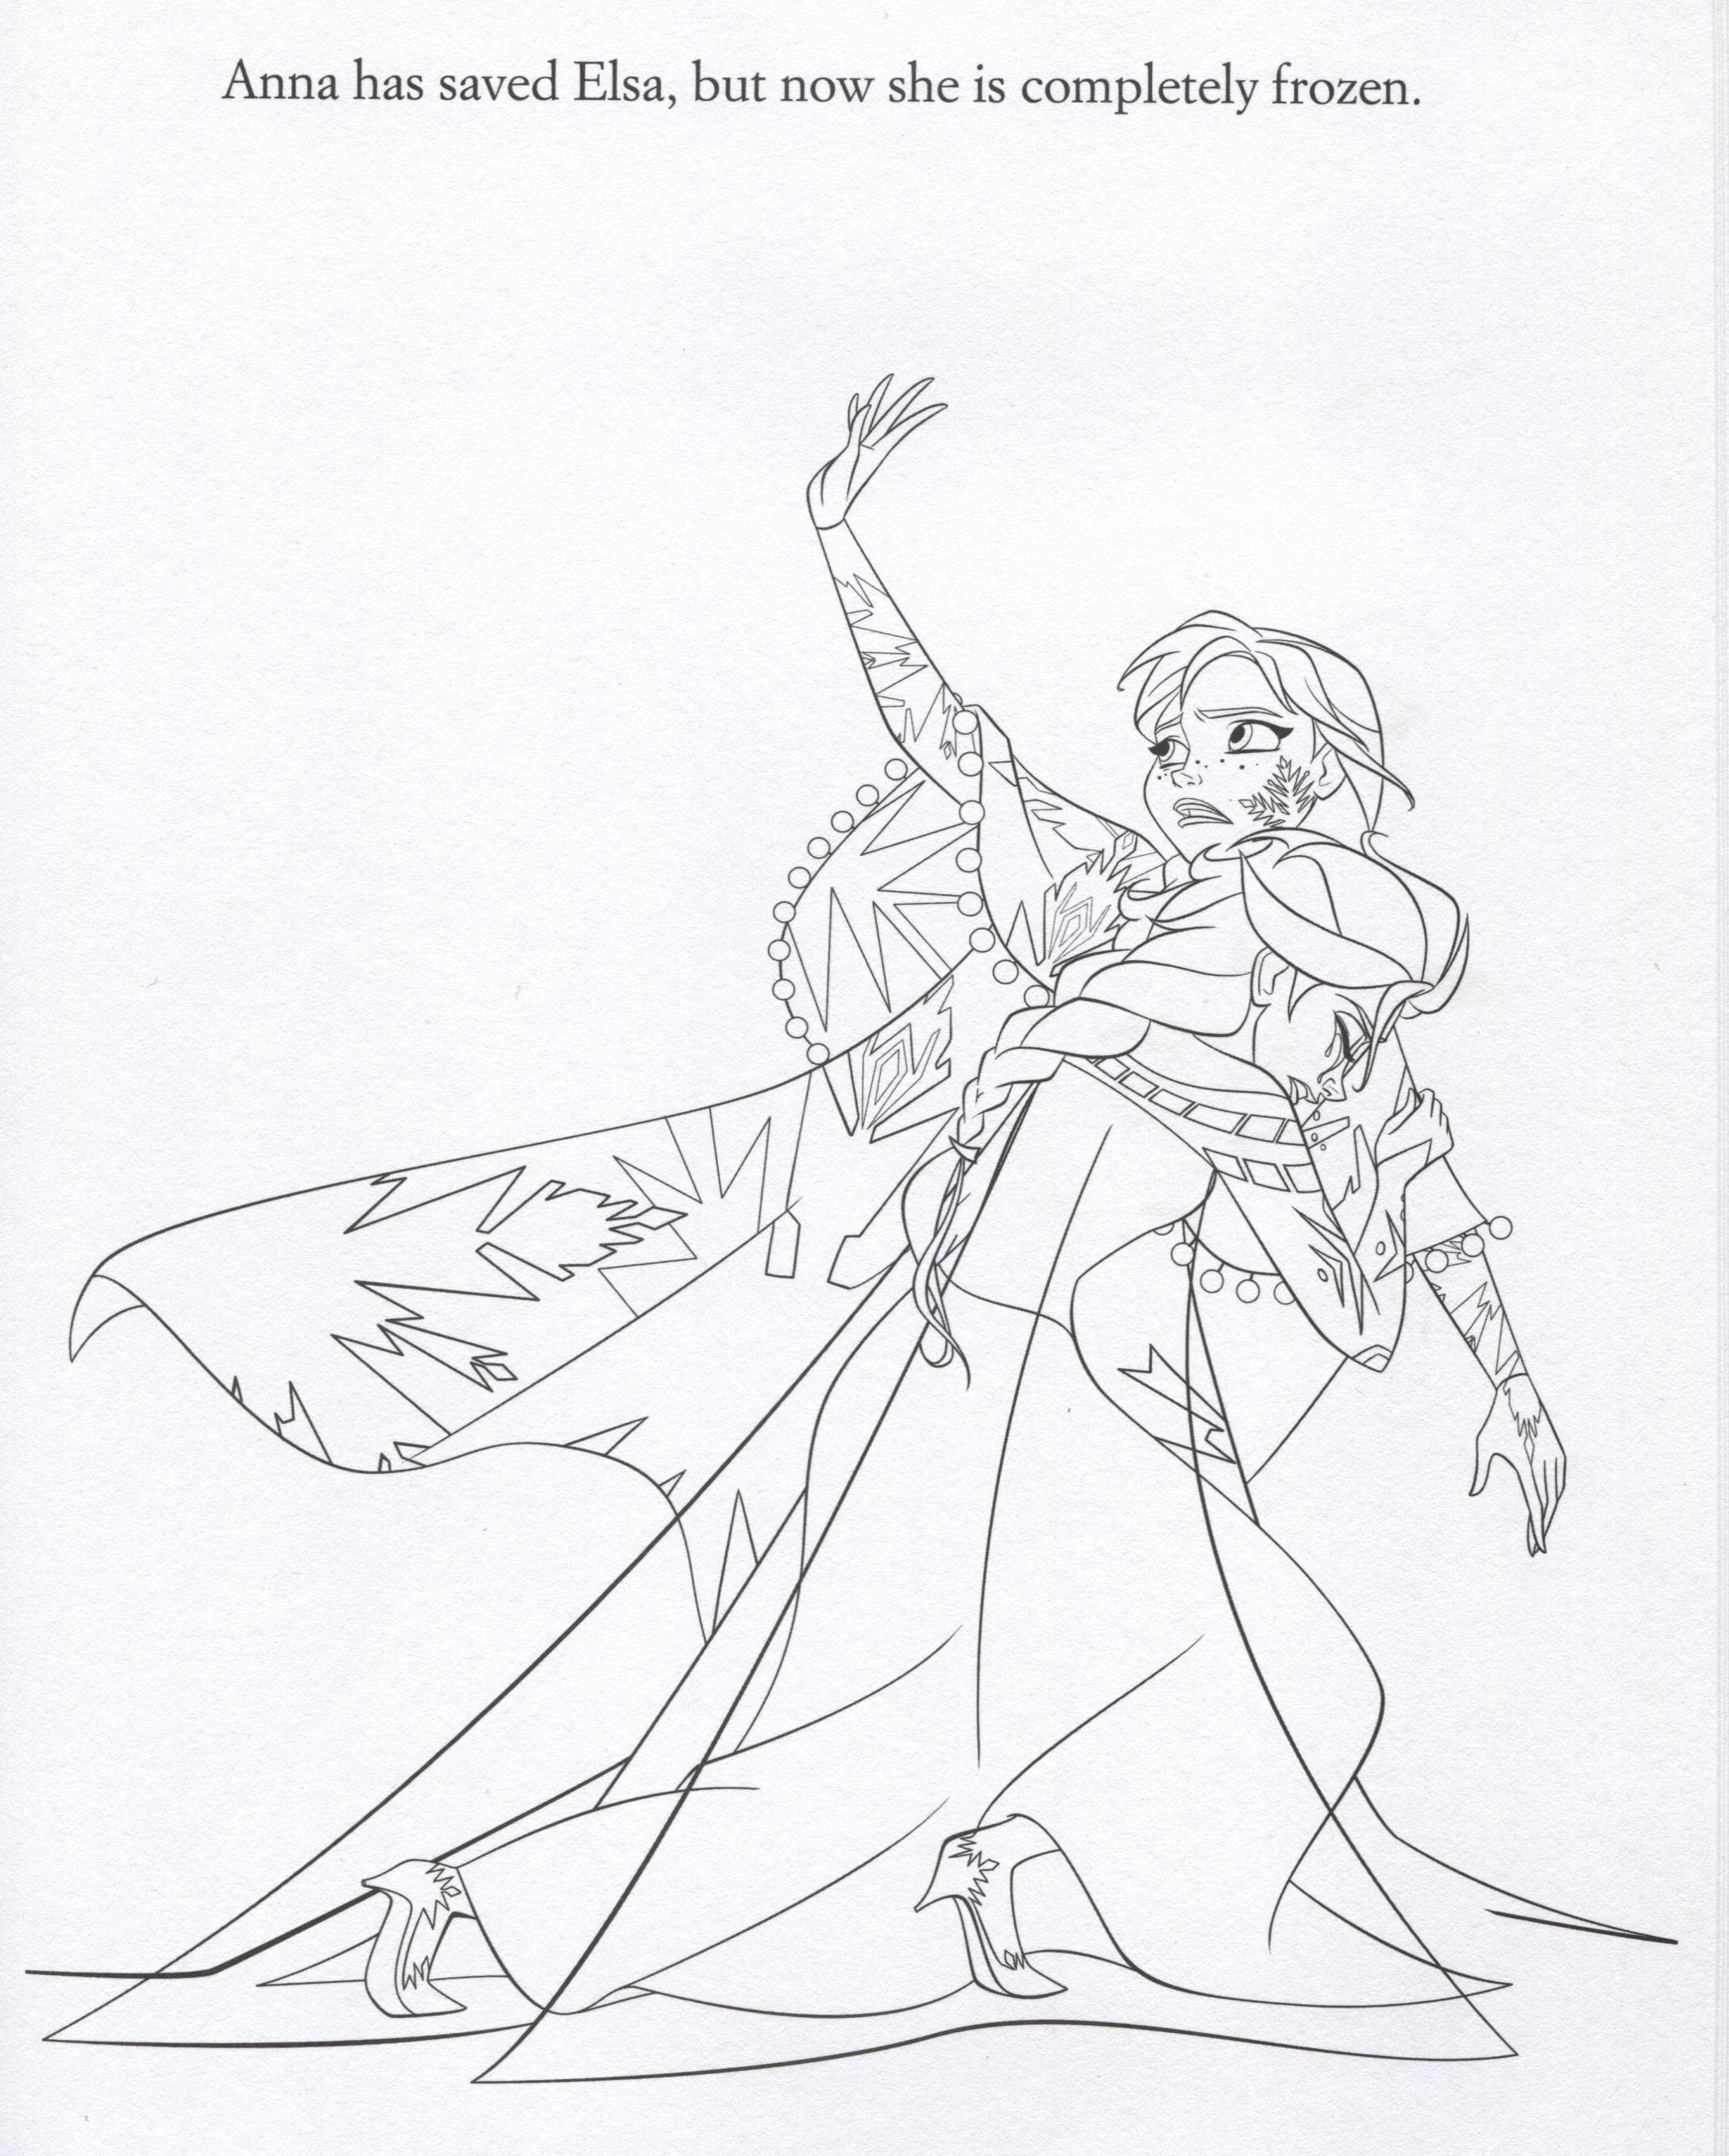 Anna And Elsa From Disney Frozen Hugging Coloring Page Porn Sex Picture 10650 The Best Porn